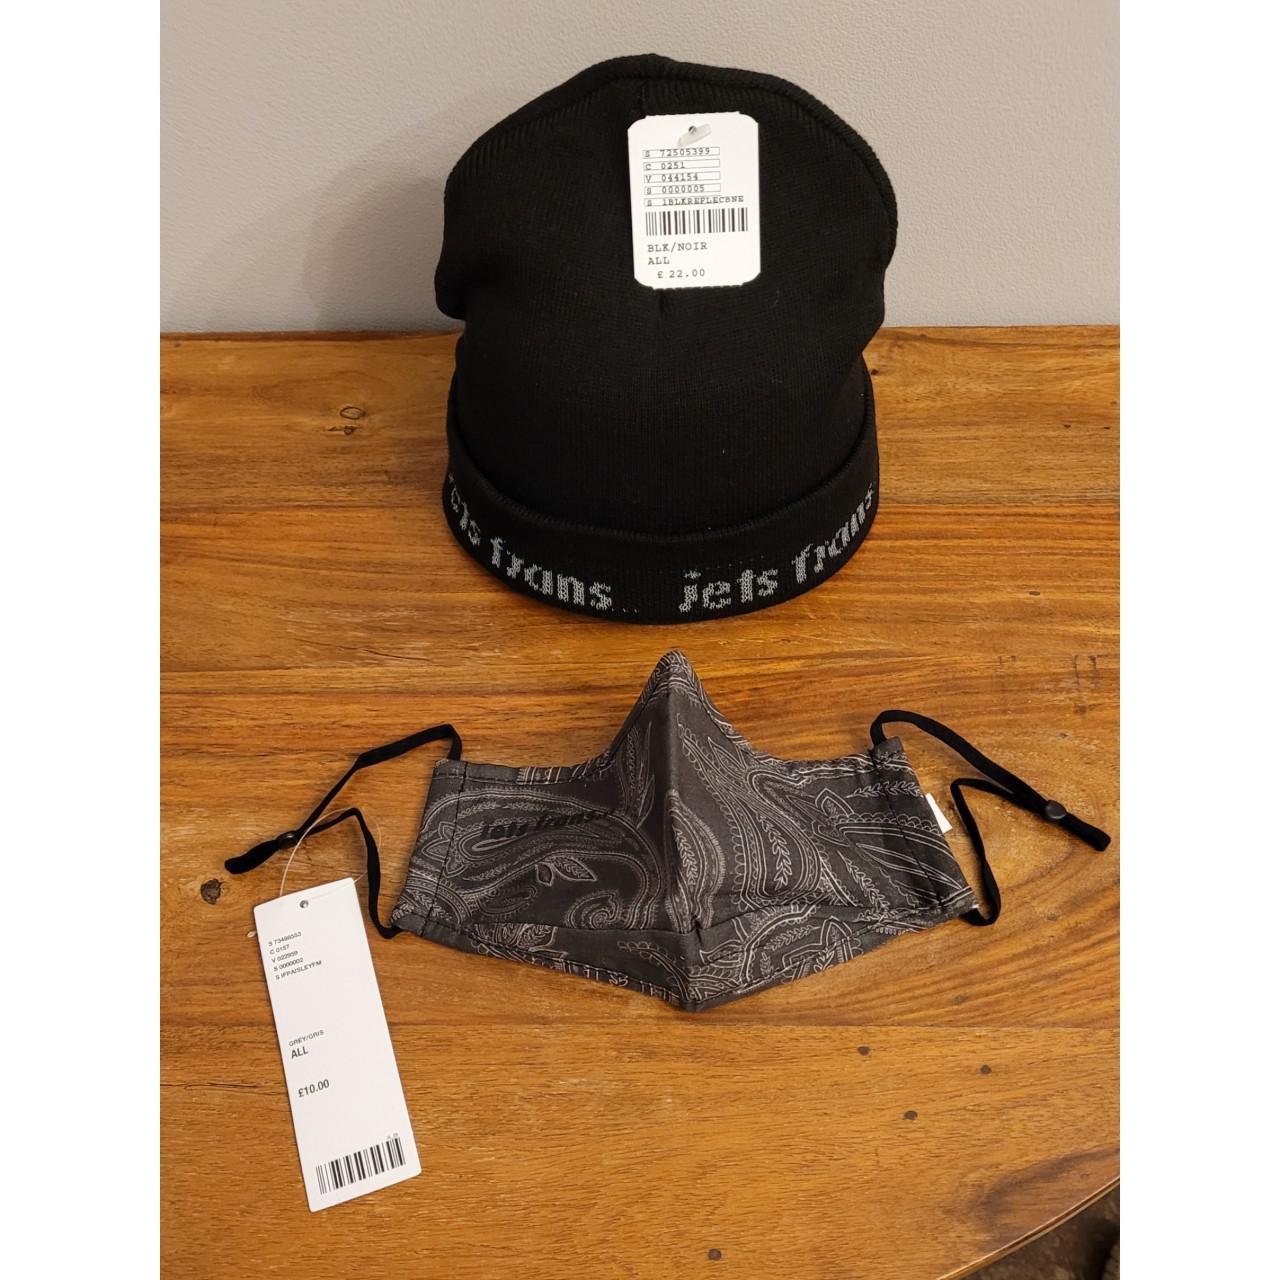 Urban Outfitters Men's Black and Grey Hat